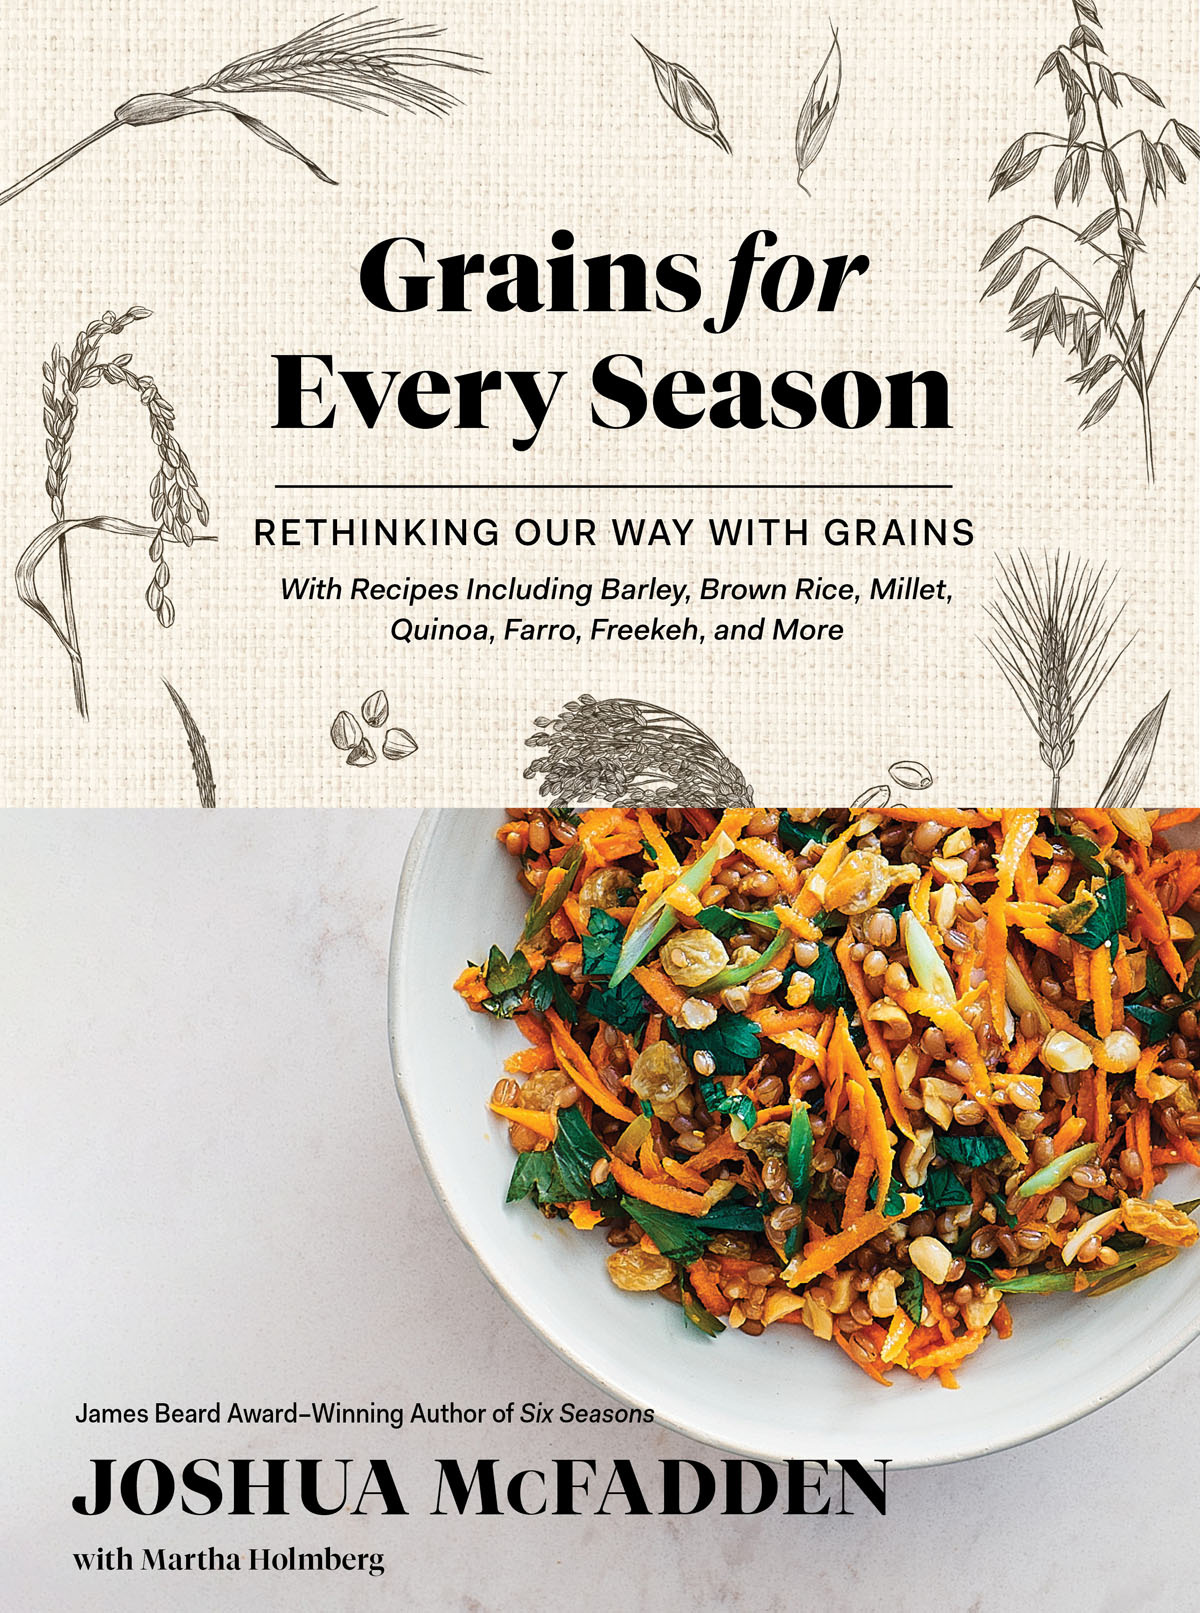 Book cover of Grains For Every Season by Joshua McFadden